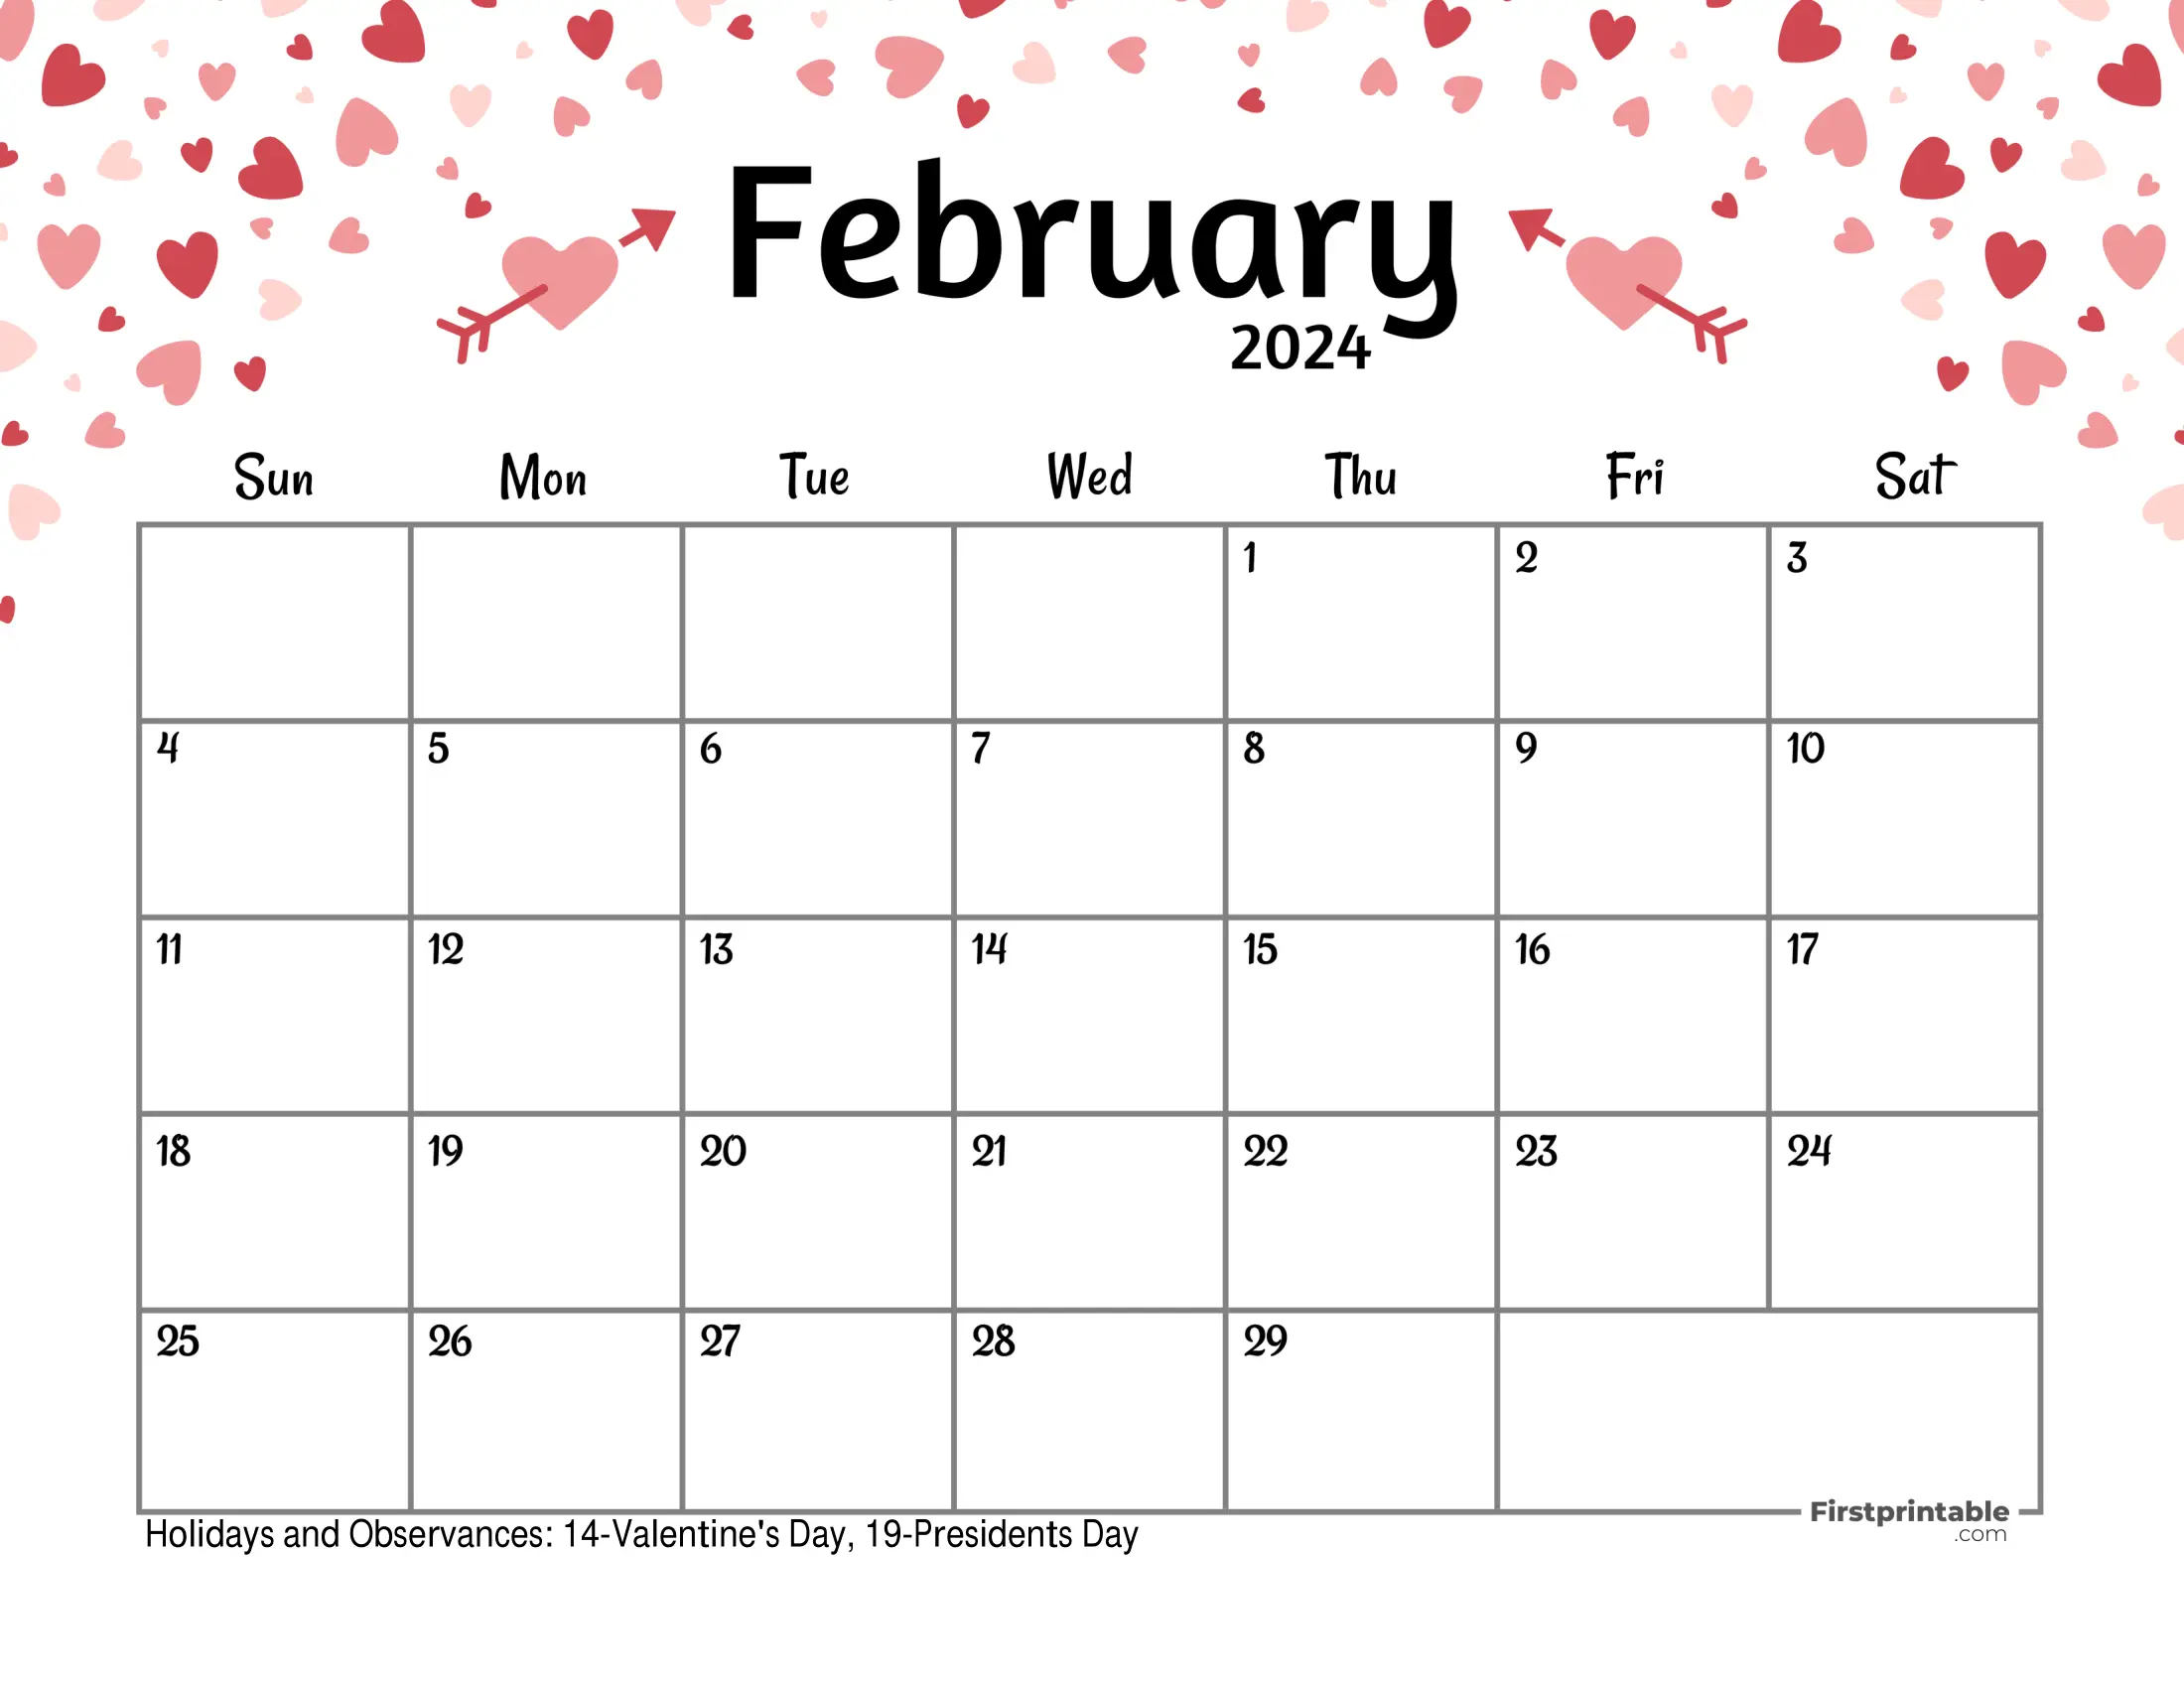 Free Printable & Fillable February Calendar 2024 with US holidays